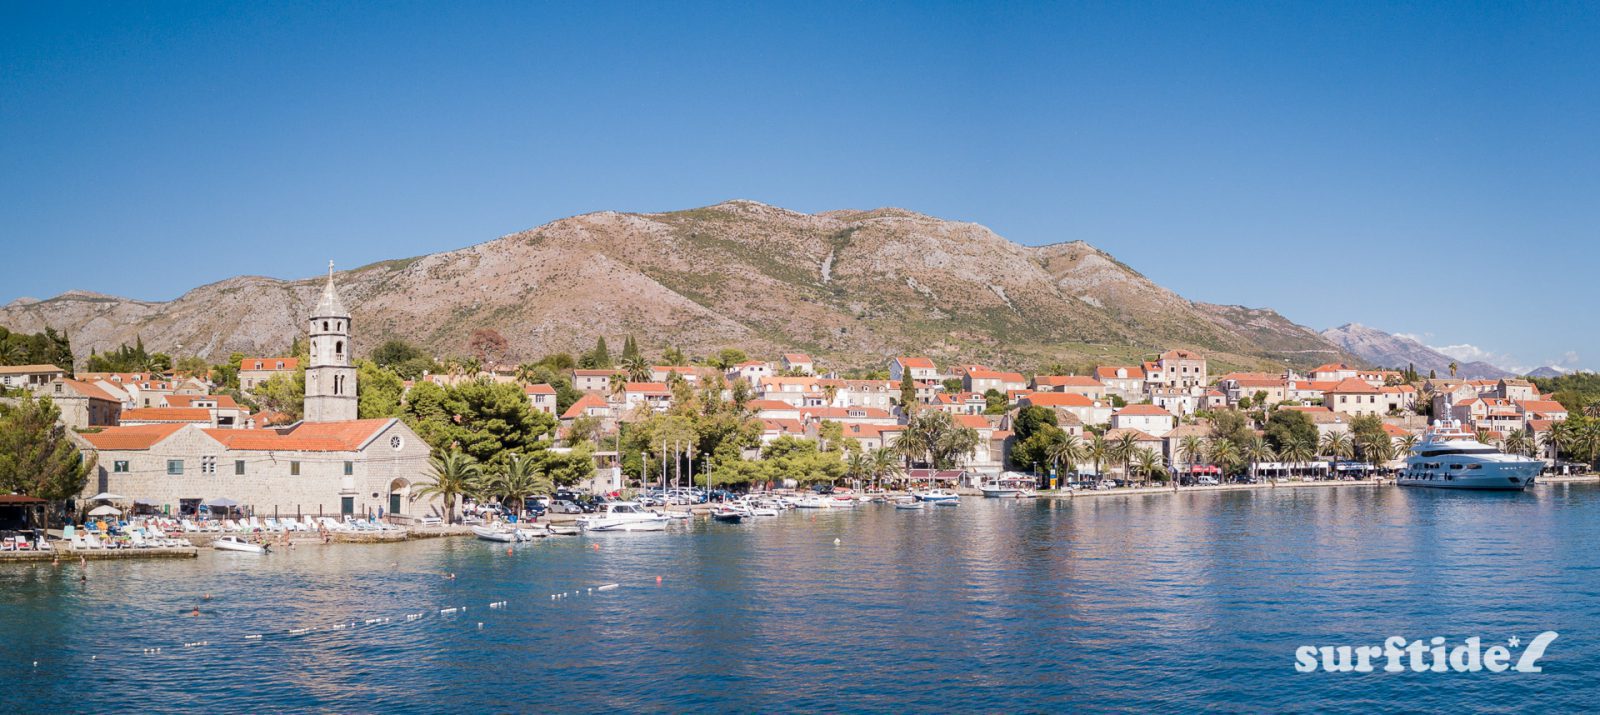 Panoramic photo showing the historic architecture, blue sea and boats in Cavtat harbour in southern Croatia